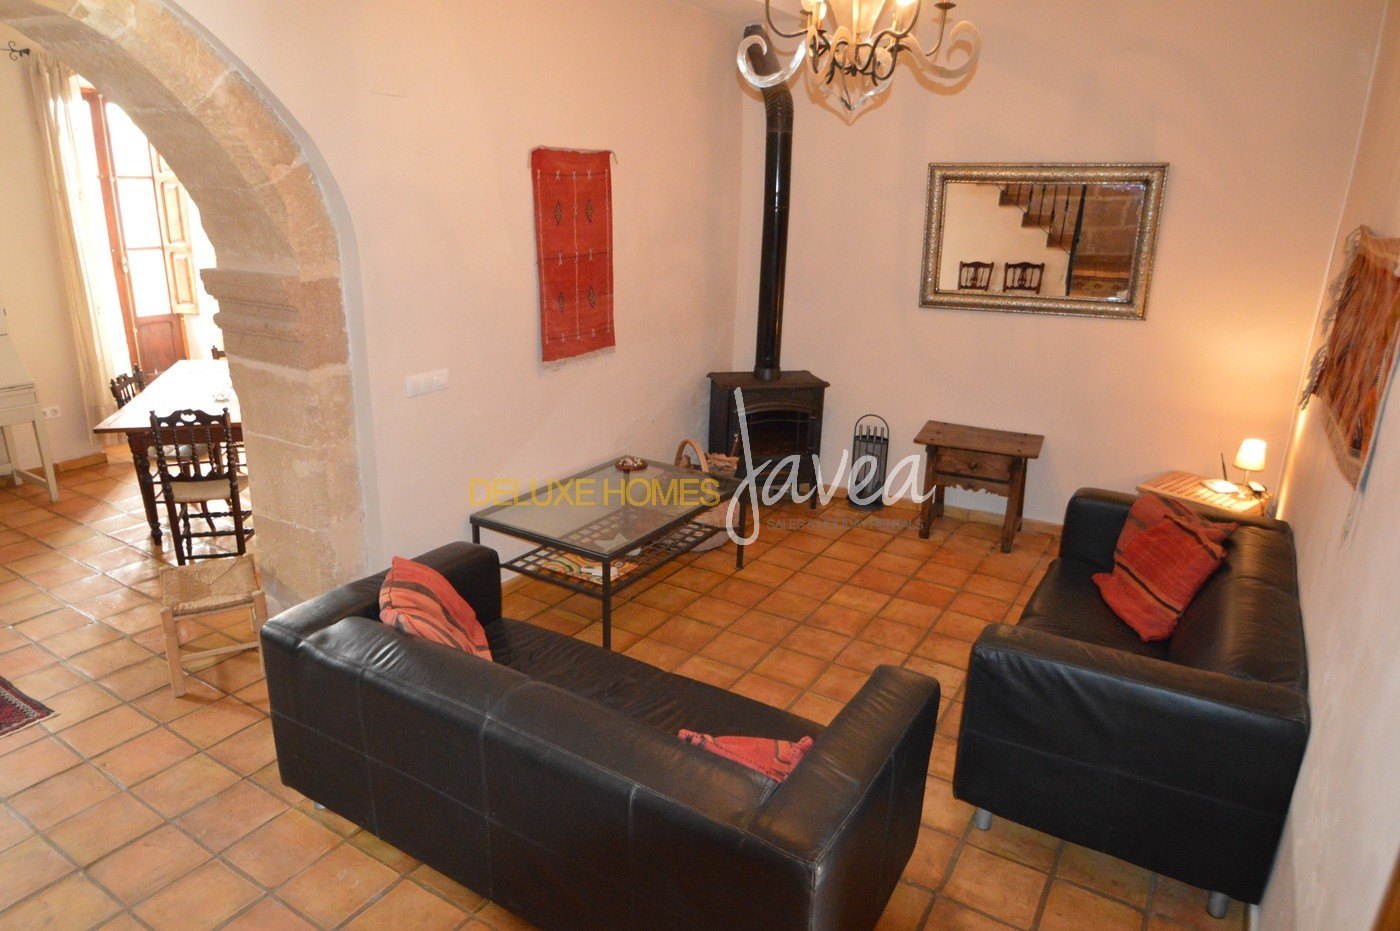 Casa Xabia – Unique Spanish Townhouse with Private (Heated) Pool and Parking